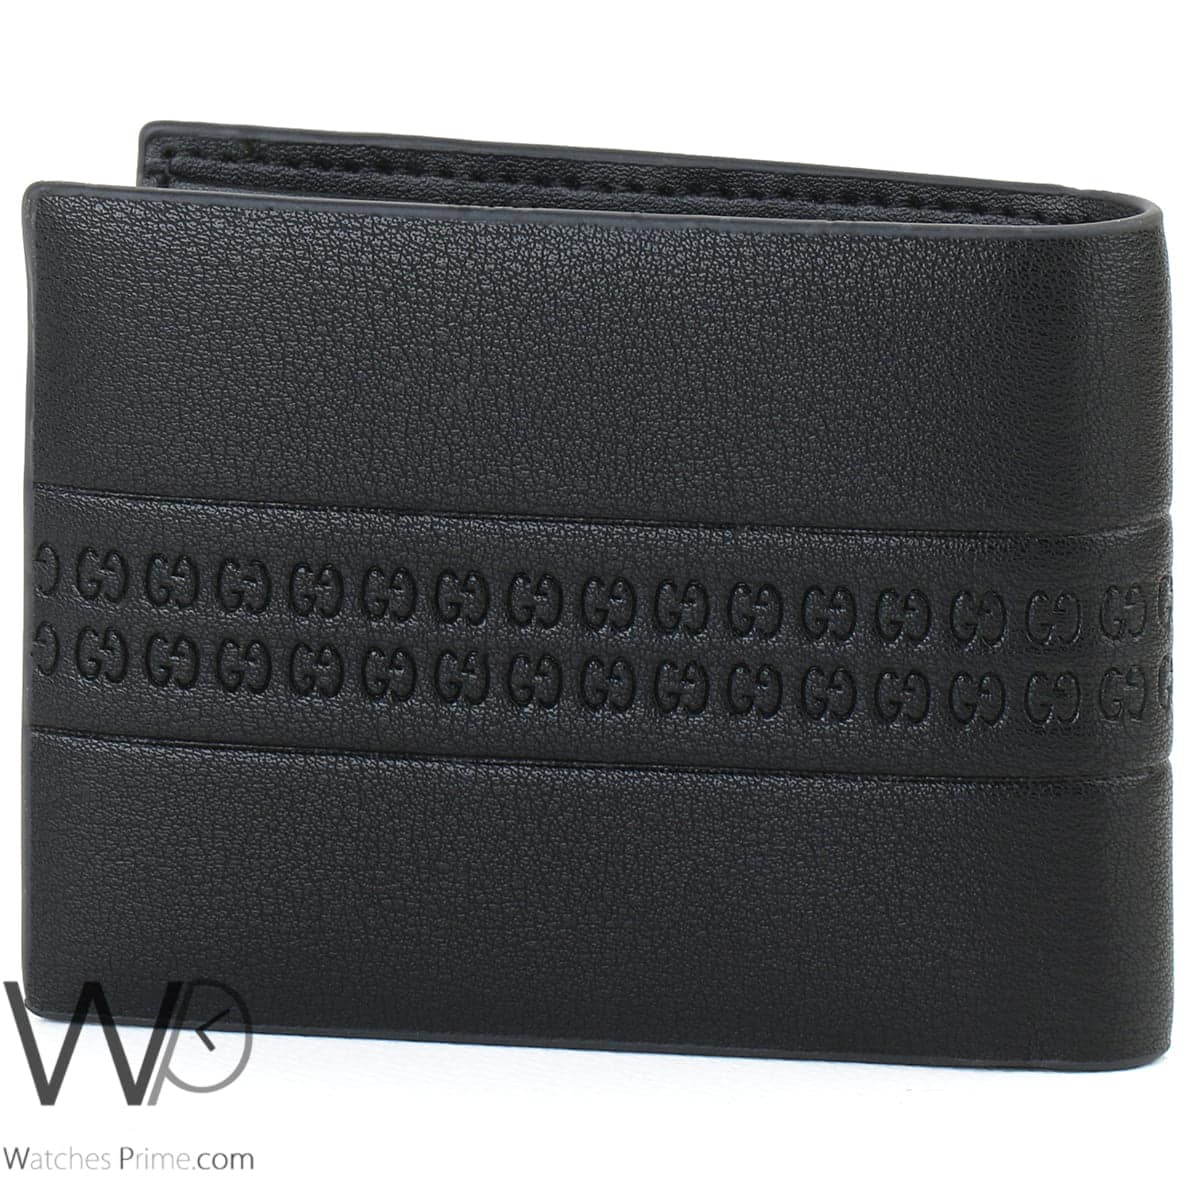 Gucci GG Wallet Black Leather For Men | Watches Prime